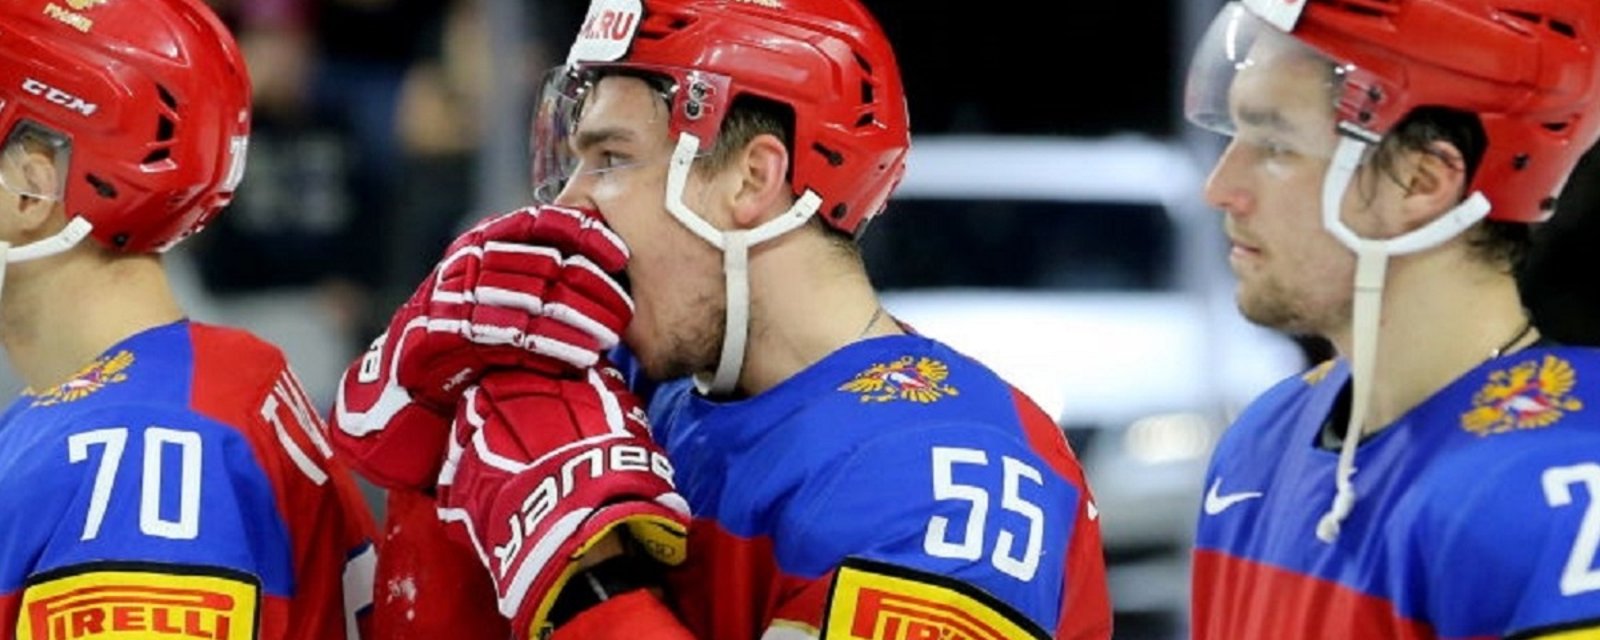 “Huge probability” KHL defenseman signs with NHL team, multiple teams in the mix.